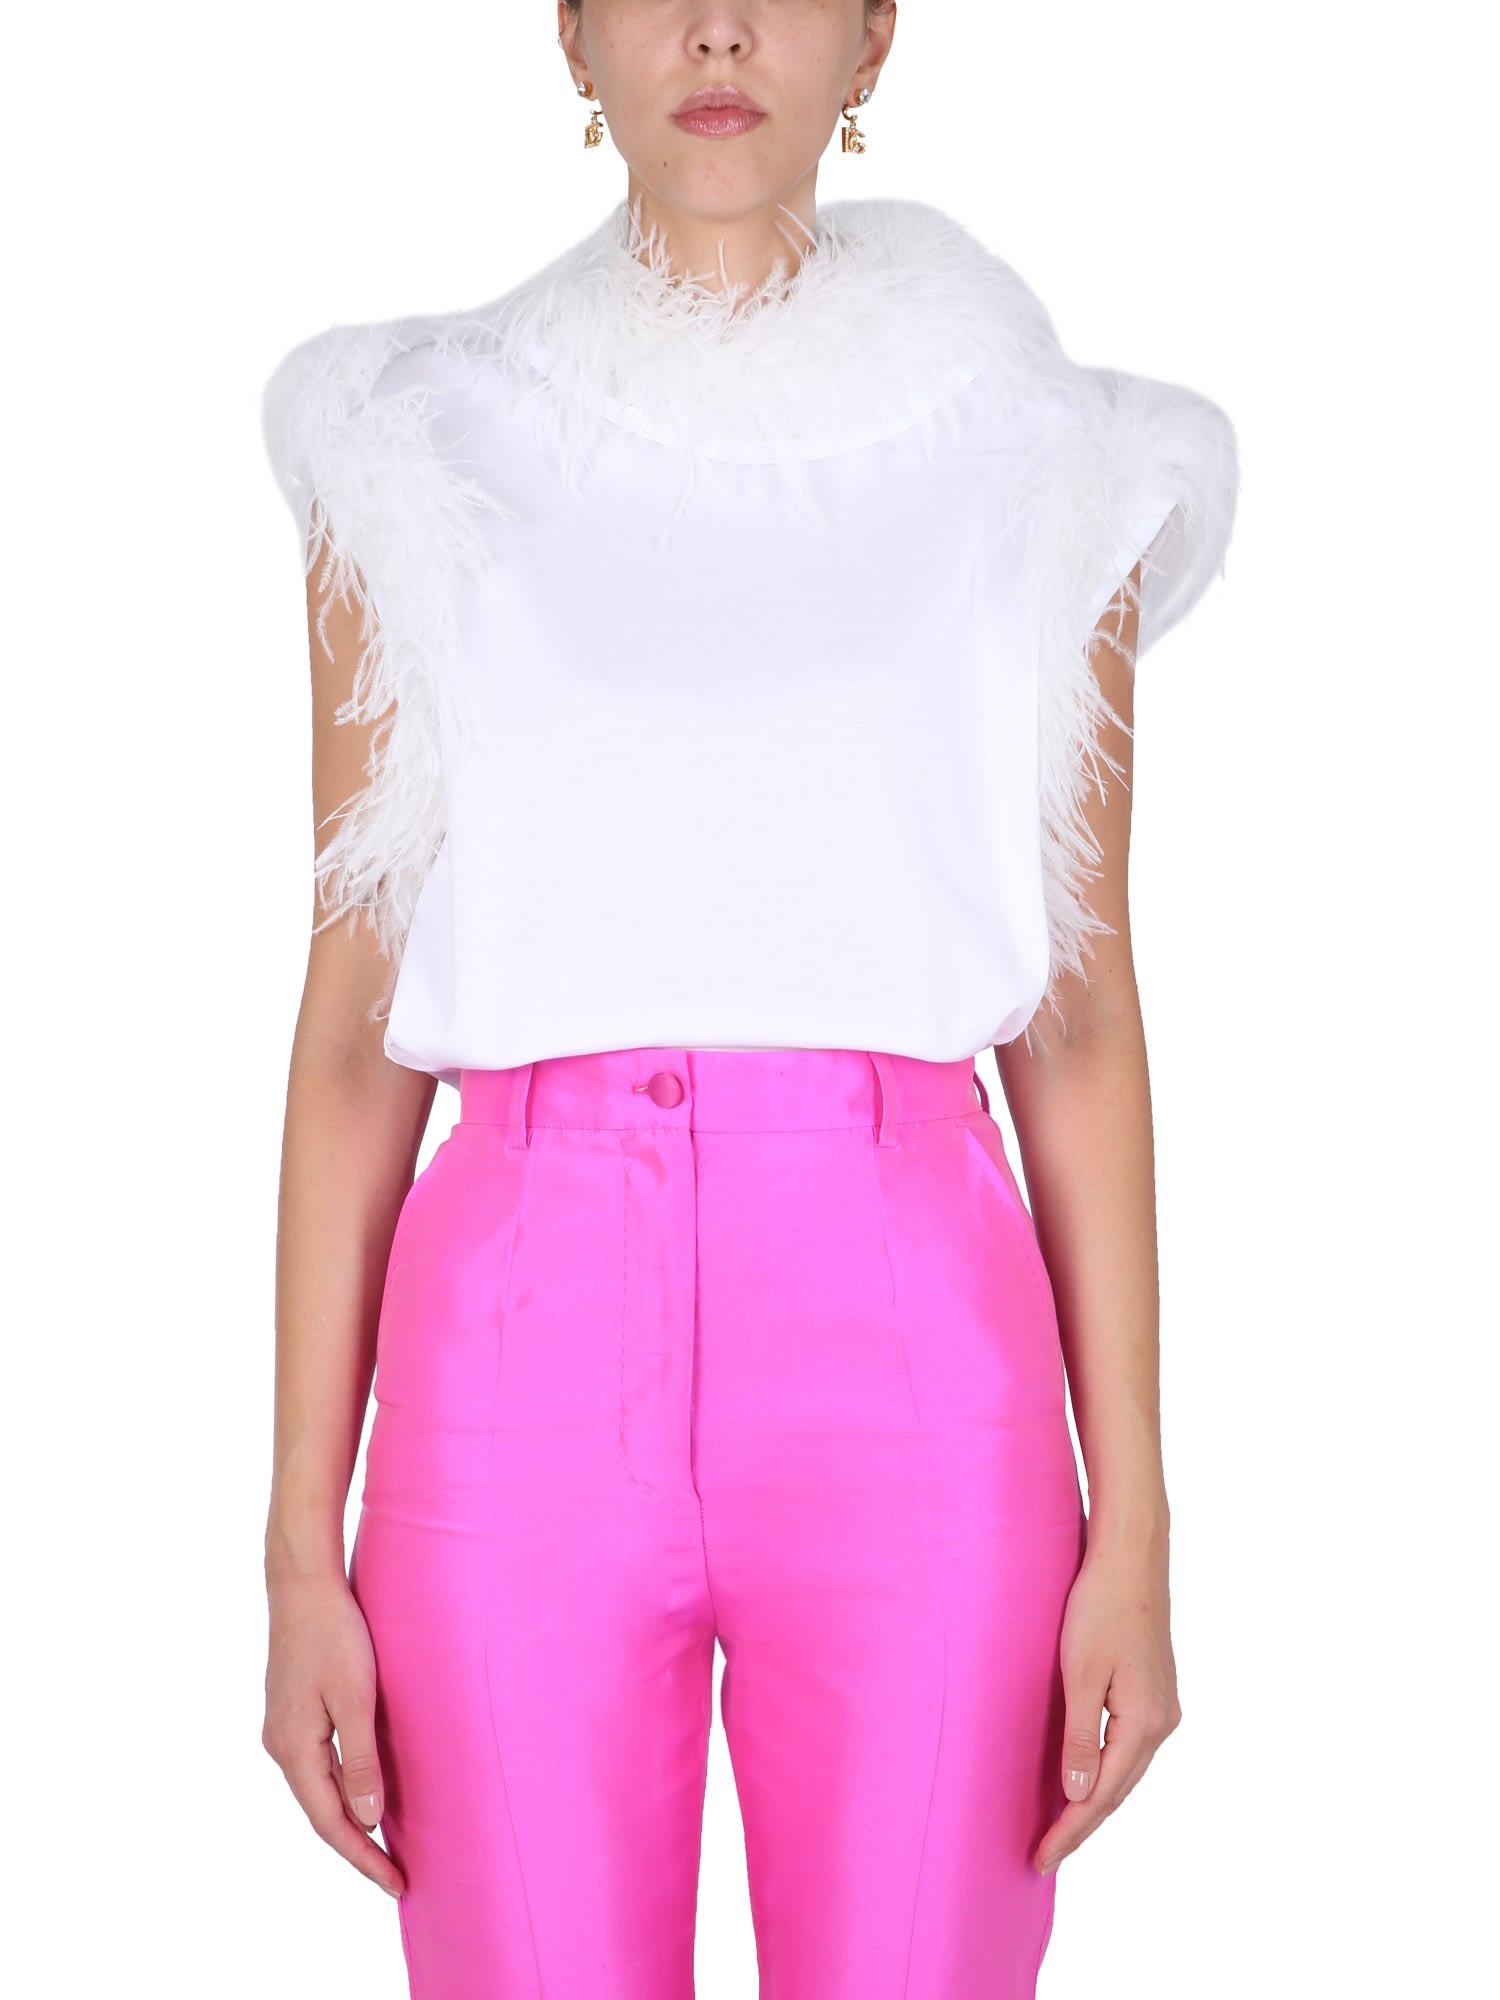 DOLCE & GABBANA TOP WITH FEATHER DETAIL,F8M69Z G7BCNW0800